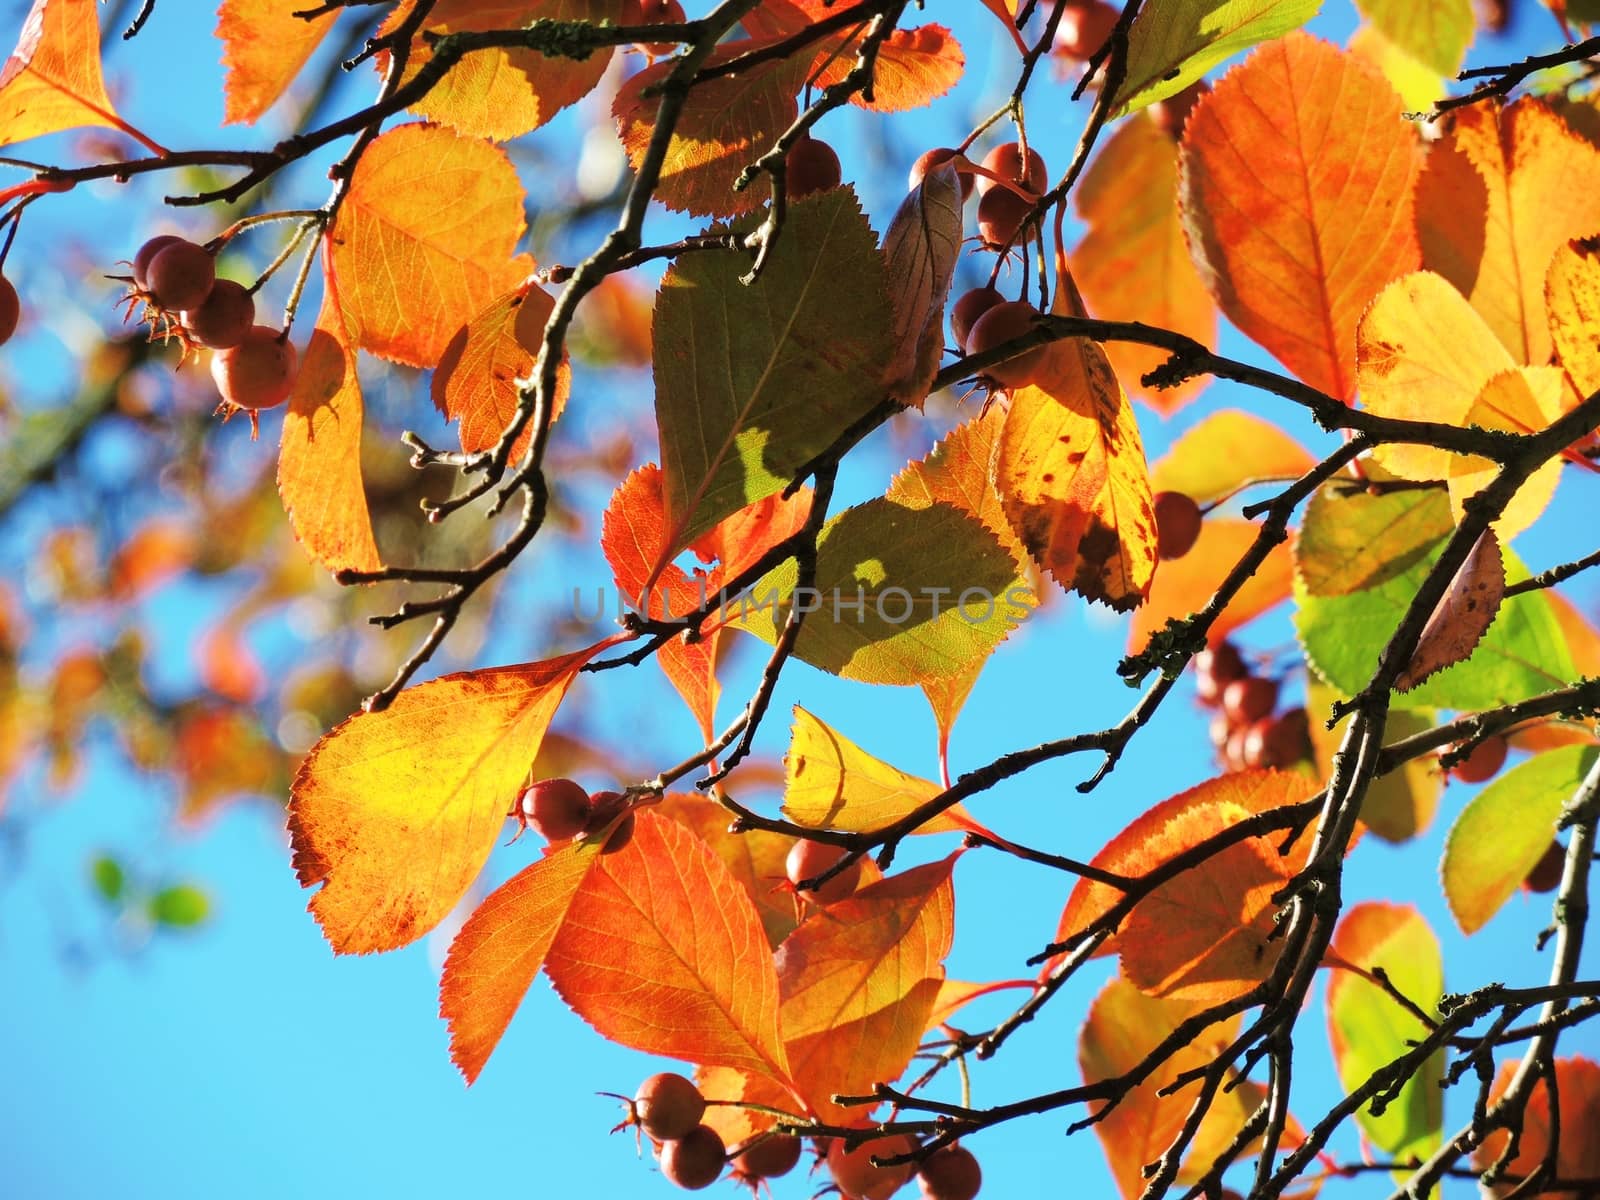 A close-up image of colourful Autumn leaves against a clear blue sky.